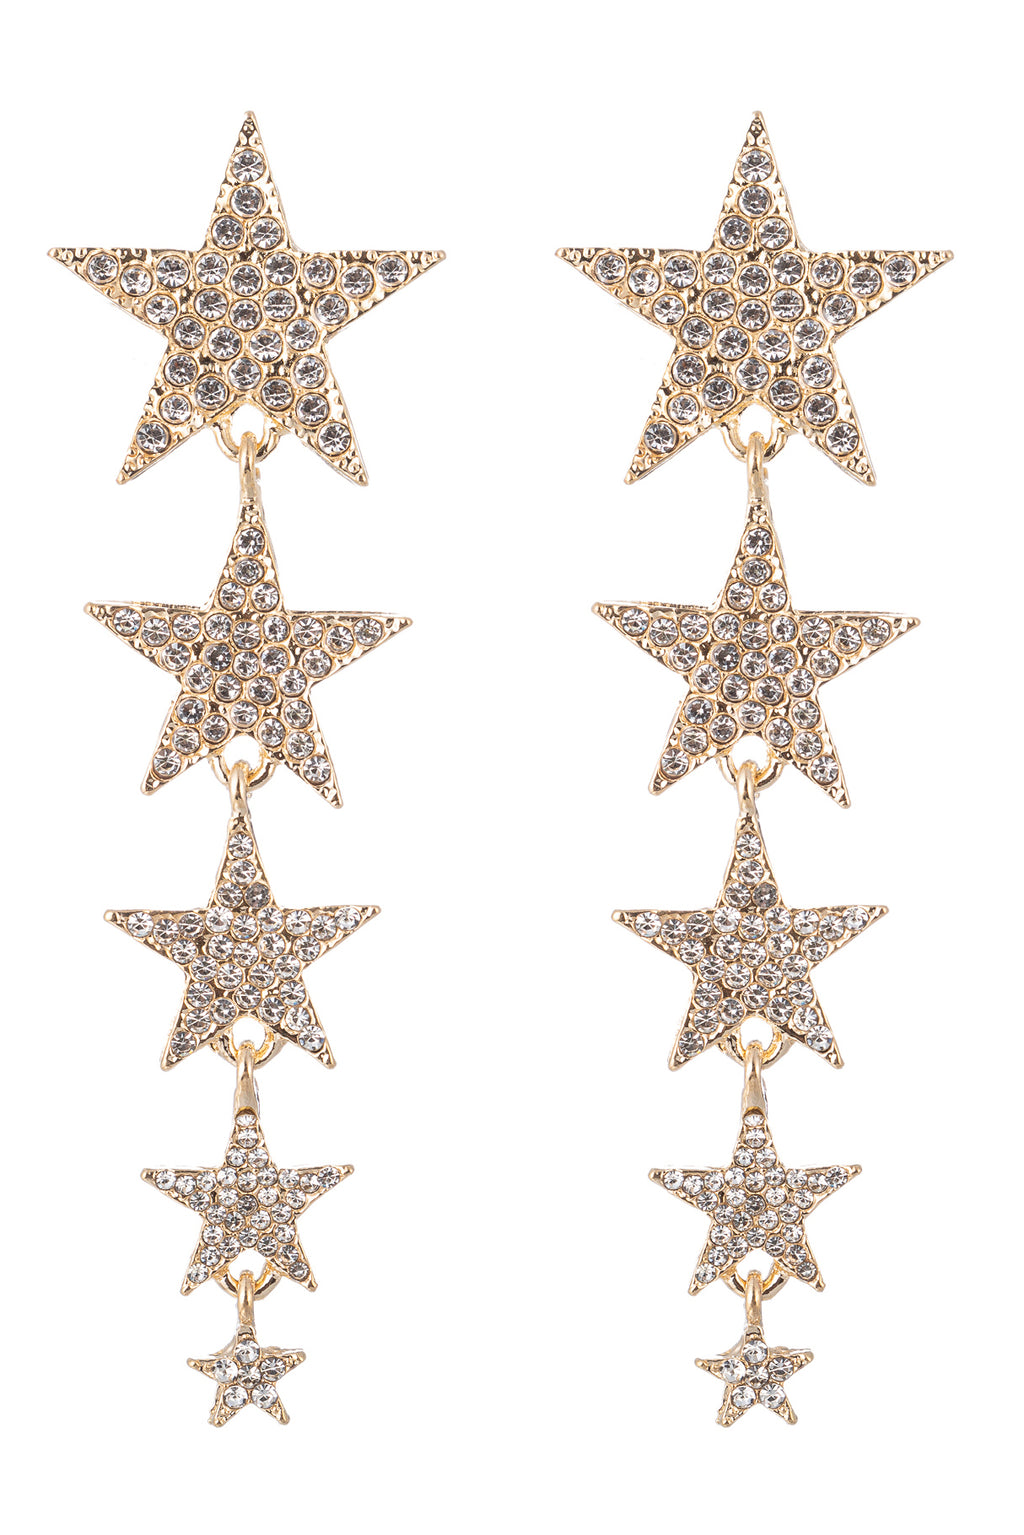 Dangling gold star earrings studded with glass crystals.